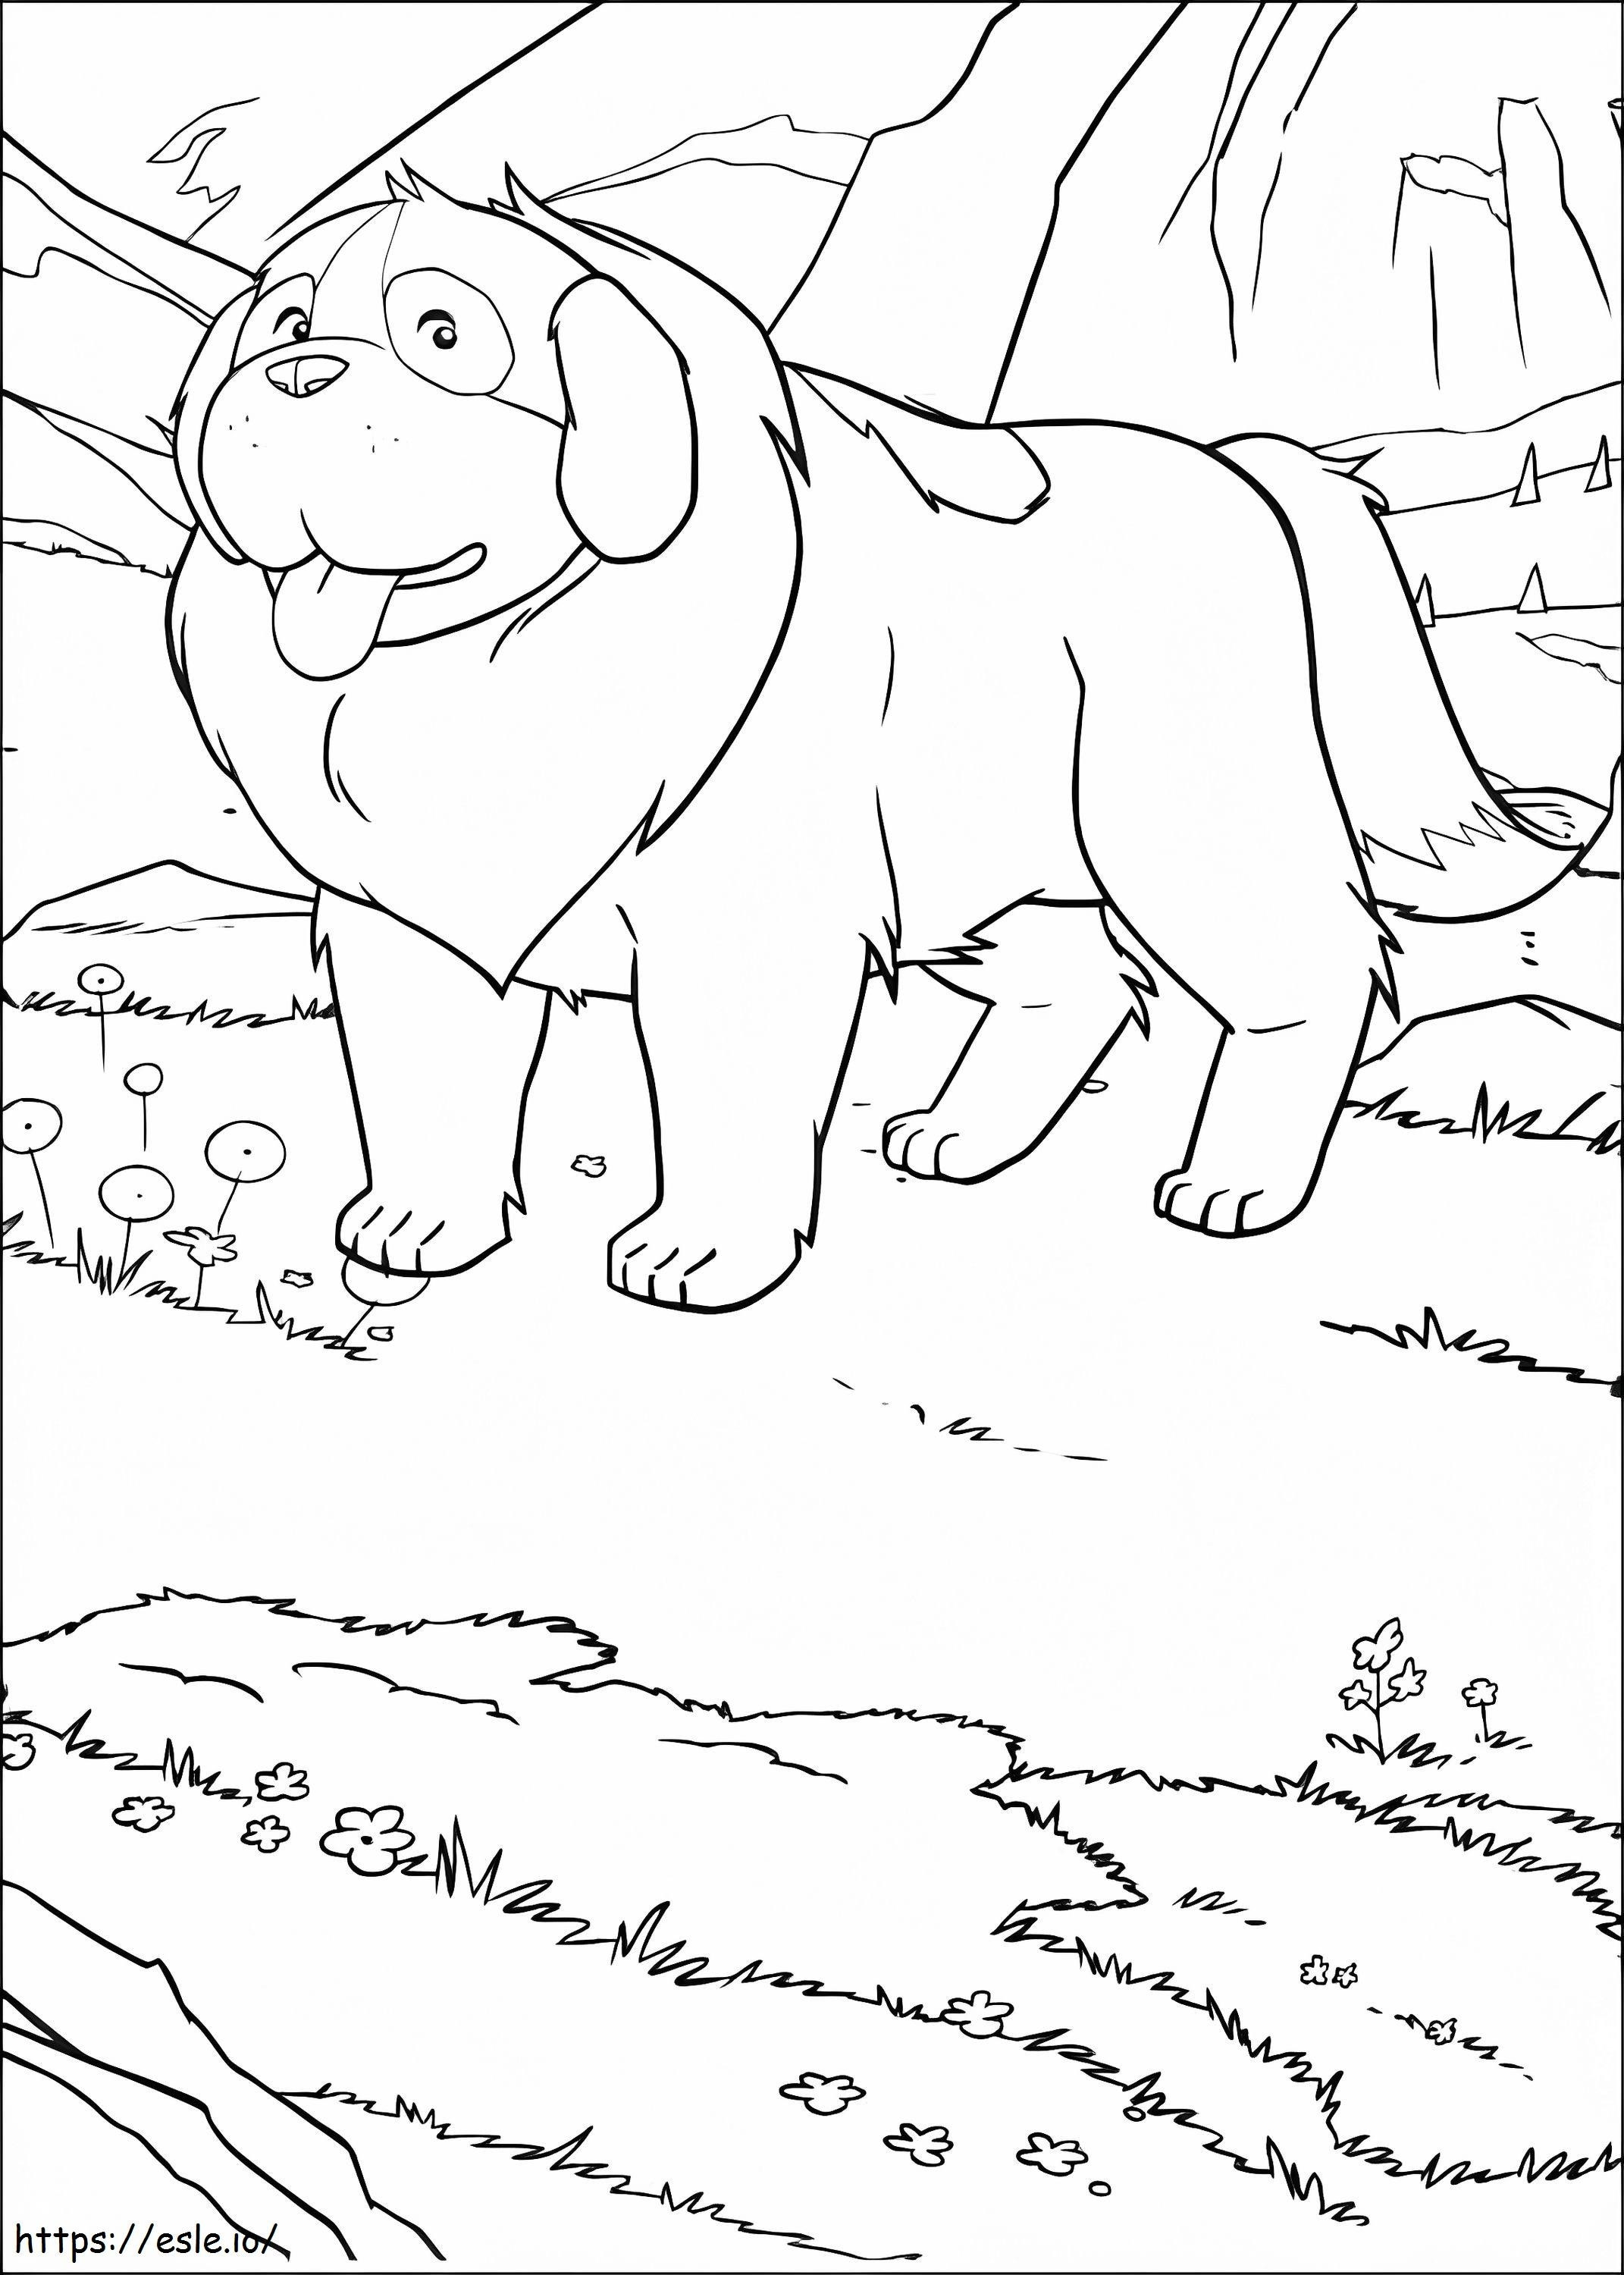 Josef From Heidi coloring page